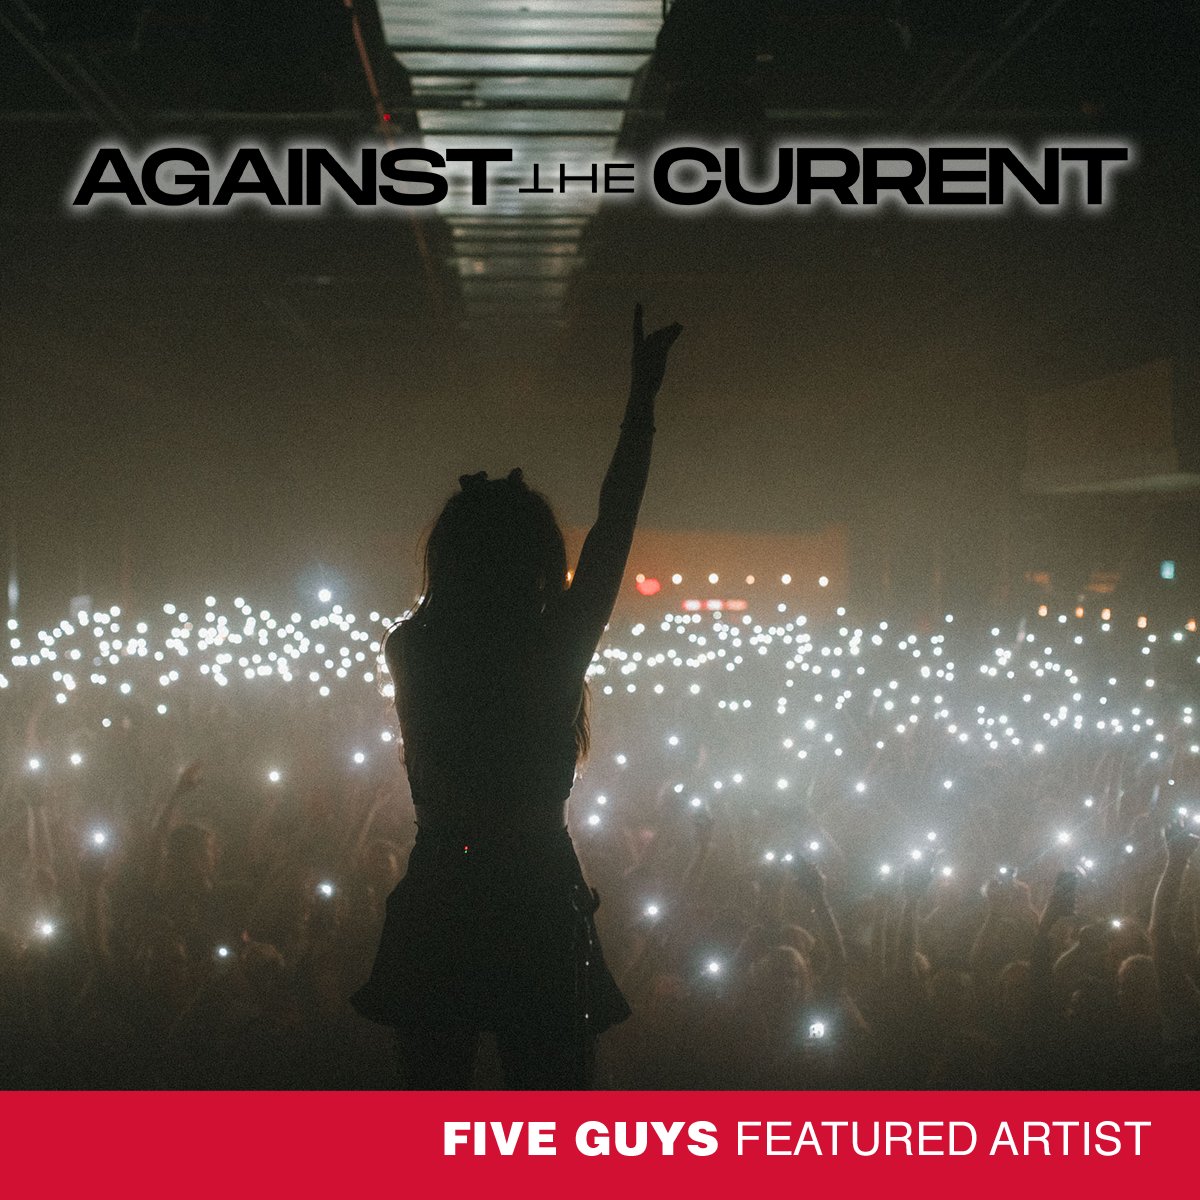 Having @ATC_BAND as our Featured Artist has made our stores even more energetic than before! Let us know what your favorite song from the band is and we may surprise you with a little gift 🎁.